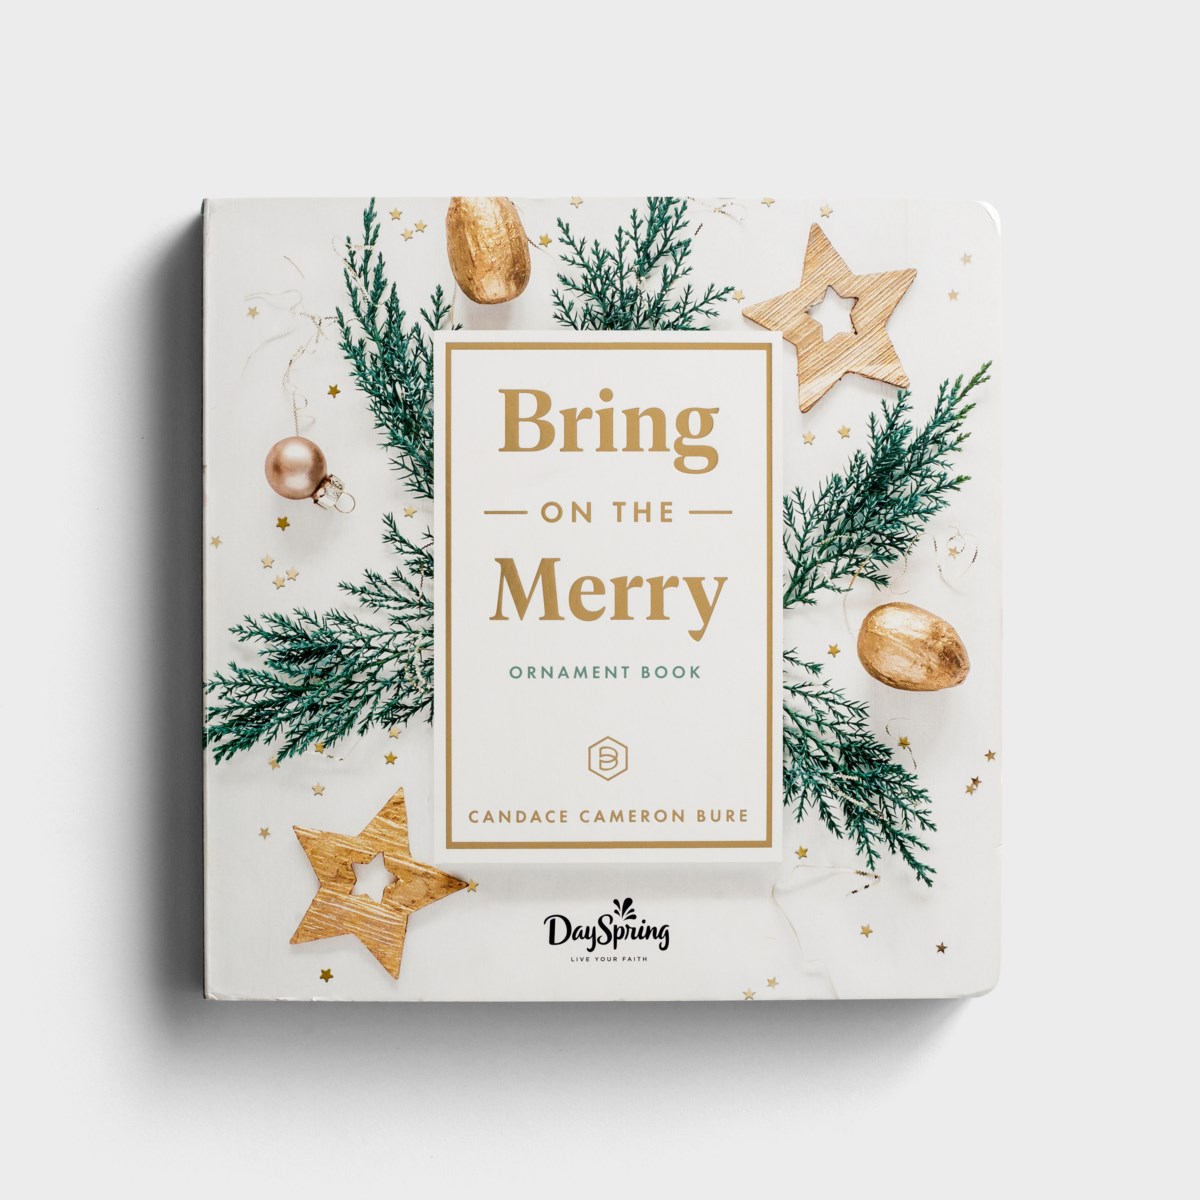 Candace Cameron Bure - Bring On The Merry - Ornament Book